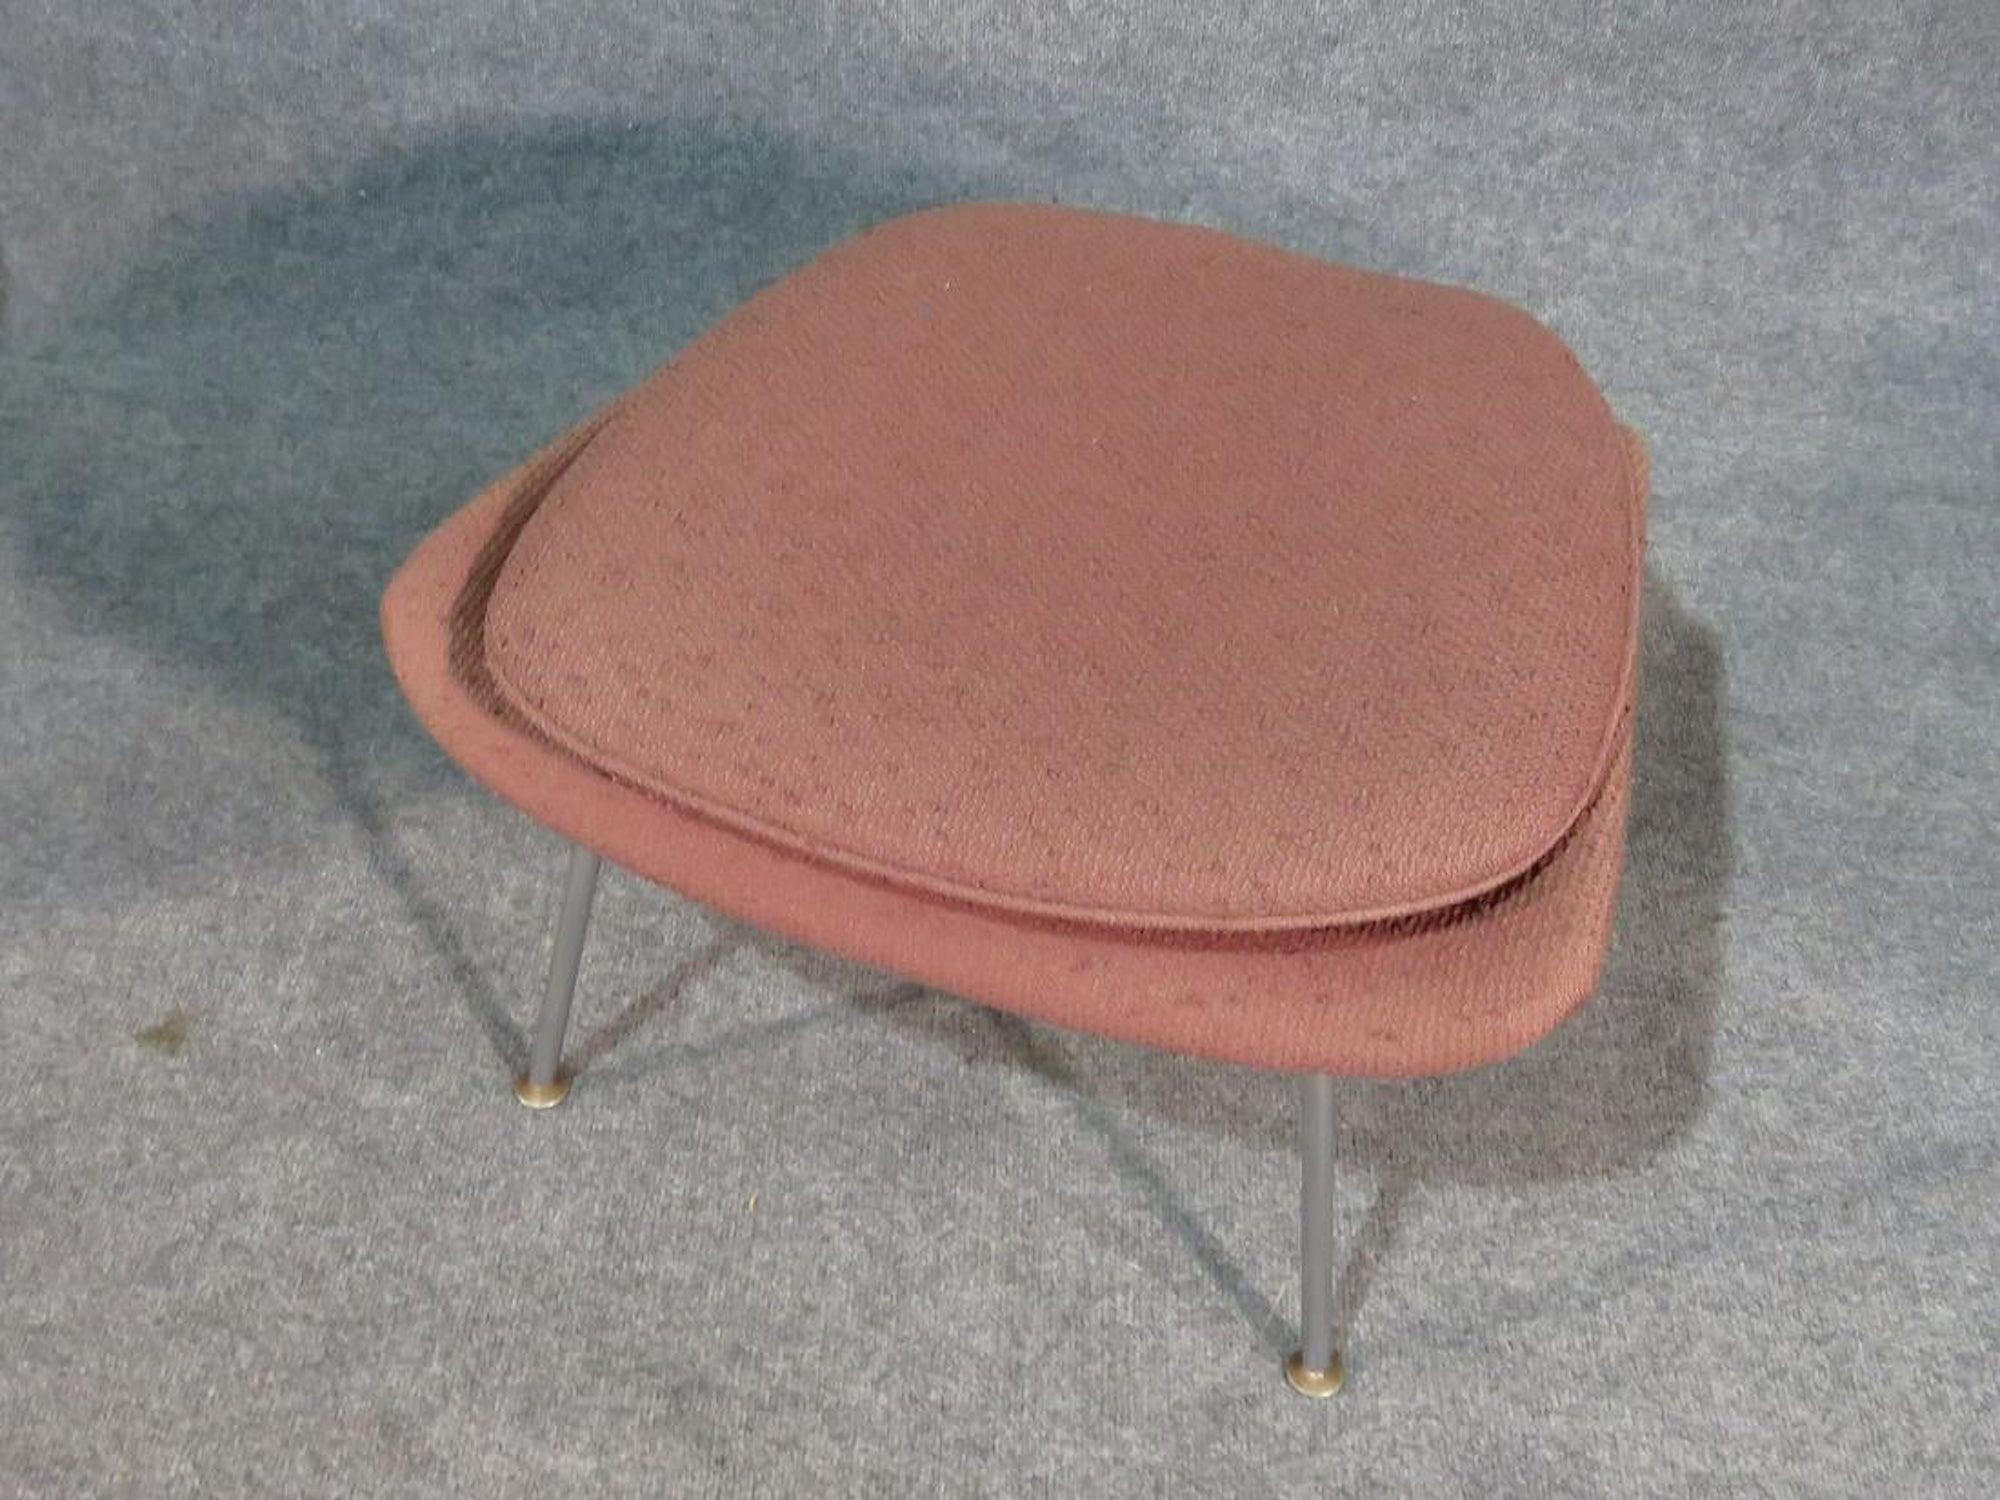 Eero Saarinen designed Womb chair and ottoman produced by Knoll.
(Please confirm item location - NY or NJ - with dealer).
  